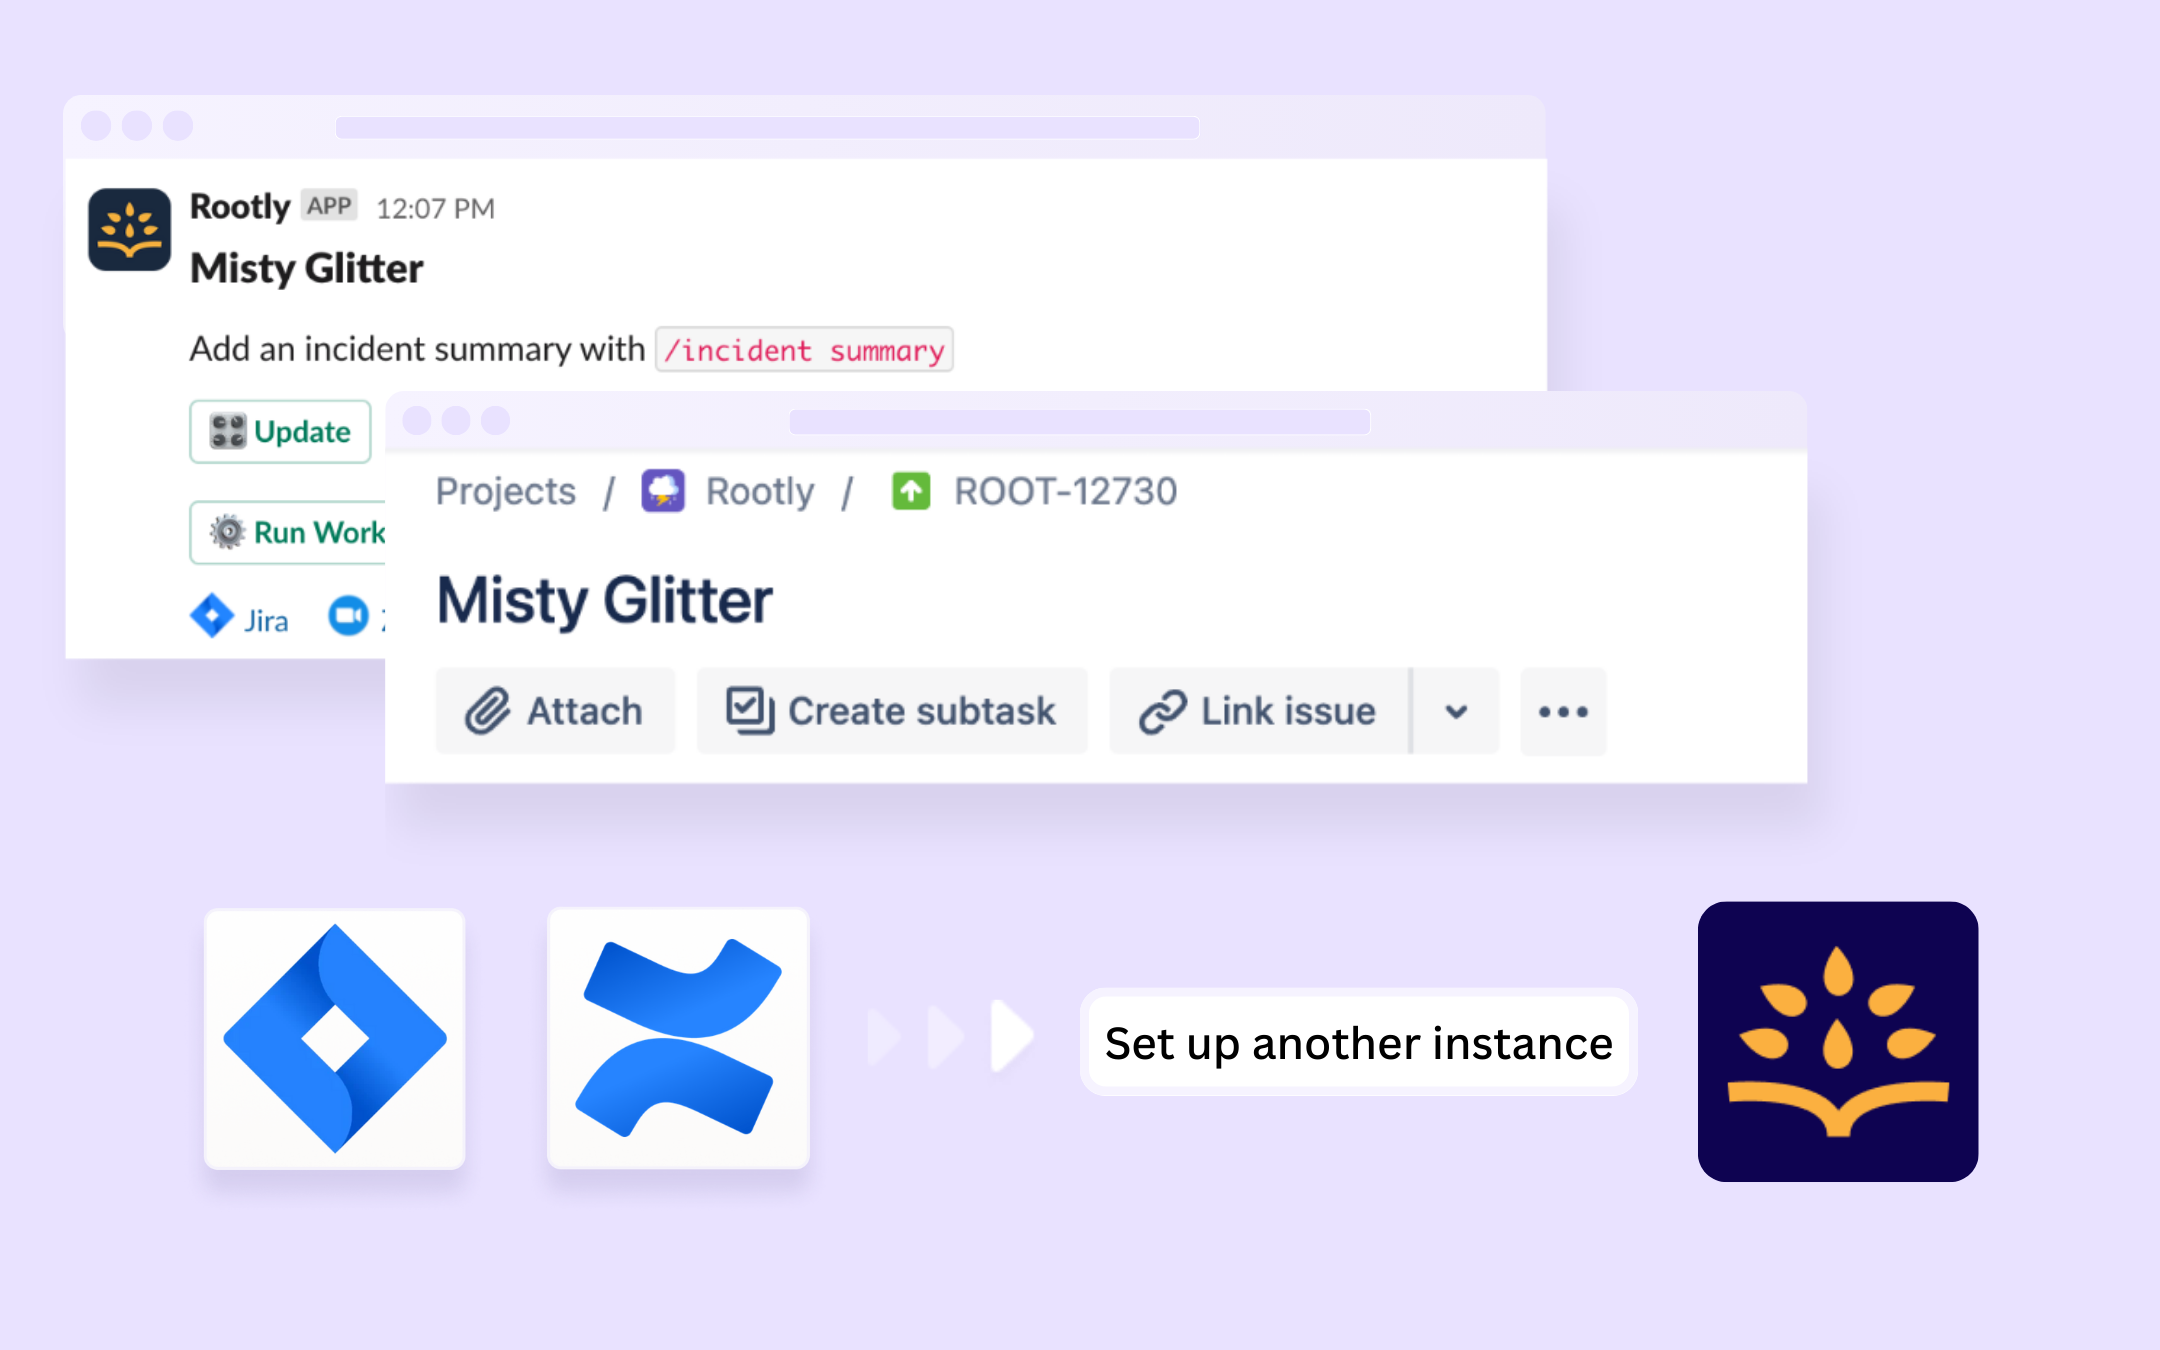 Integrate with Multiple Instances of Jira and Confluence